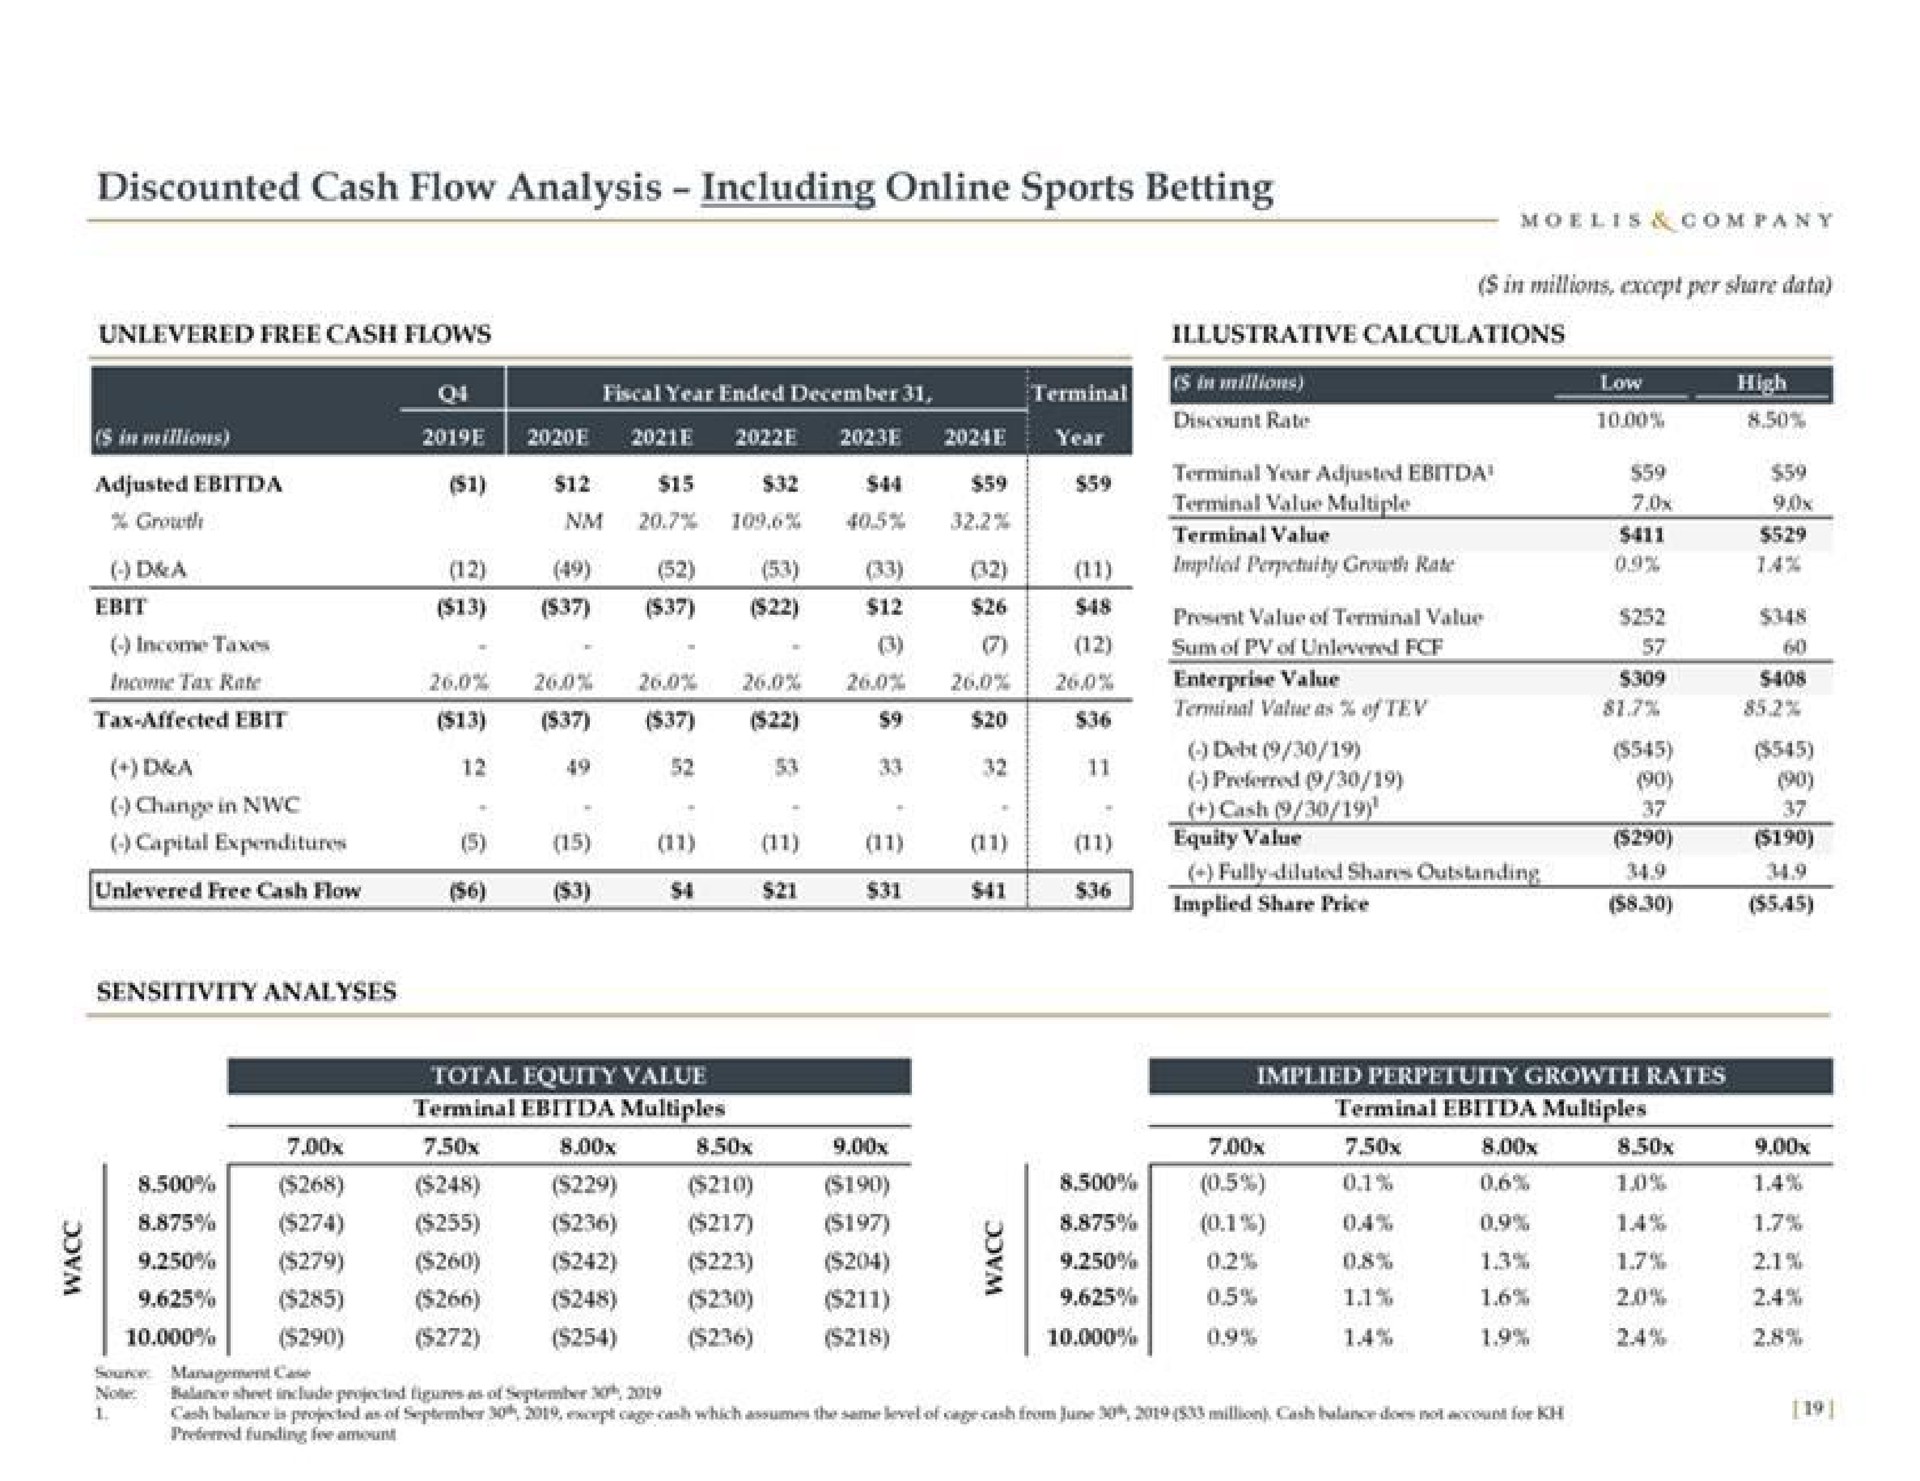 discounted cash flow analysis including sports betting i a i | Moelis & Company